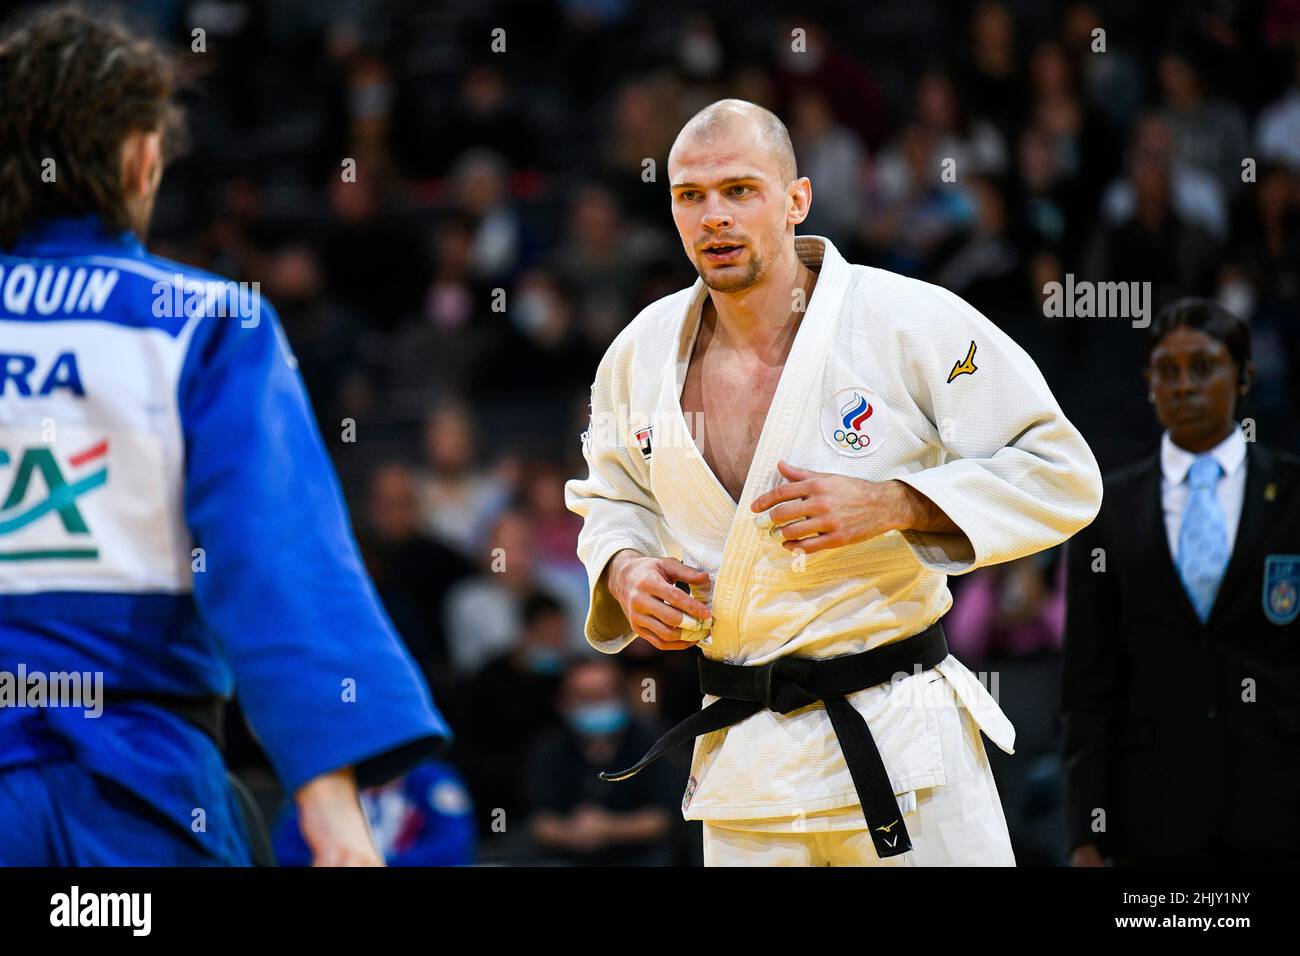 Men -73 kg, Denis IARTCEV of Russia competes during the Paris Grand Slam 2021, Judo event on October 16, 2021 at AccorHotels Arena in Paris, France - Stock Photo